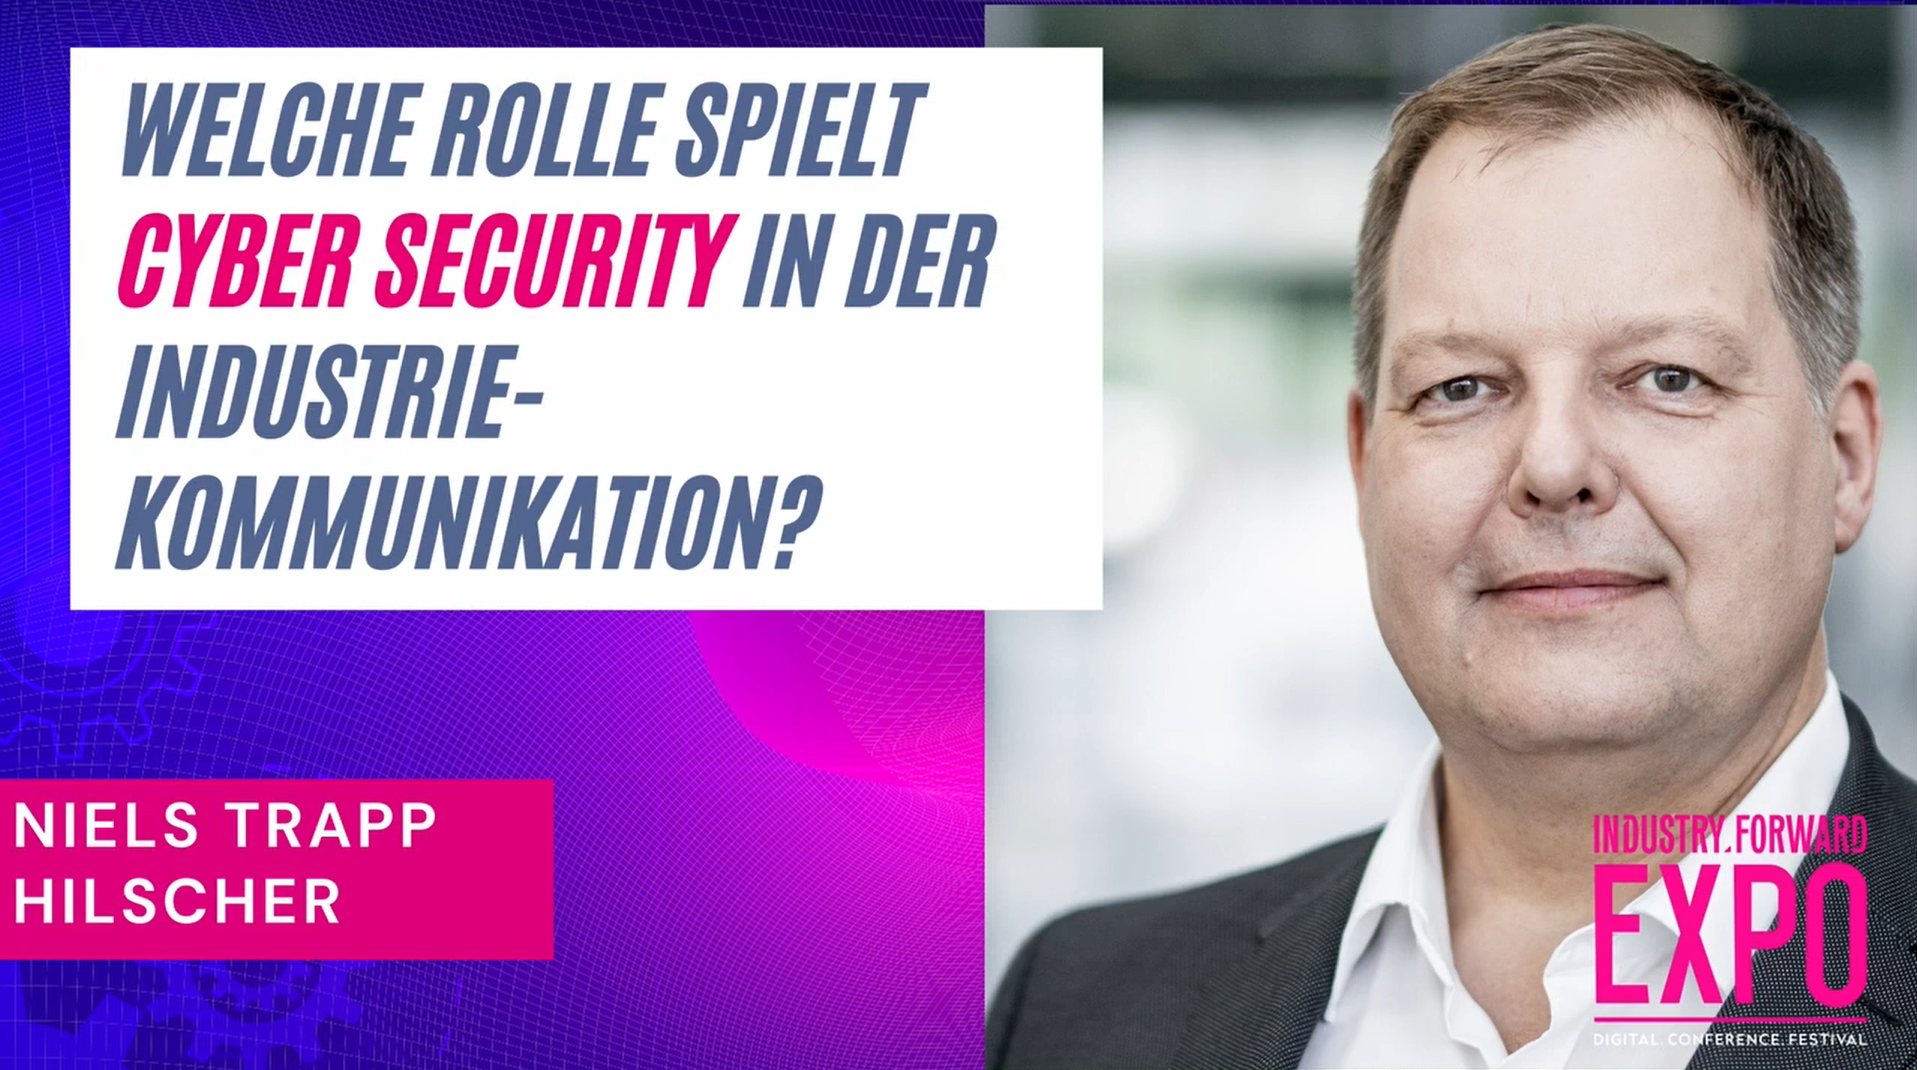 In the top left corner in a white bos is written "Welche Rolle spielt Cyber Security in der industriellen Kommunikation?" Below that is written Niels Trapp, Hilscher in a violet box. The background of the left part of the picture is filled with a dark purple colour and icons of gears on the left side. On the right side you can see a portrait of a man in a business suit.